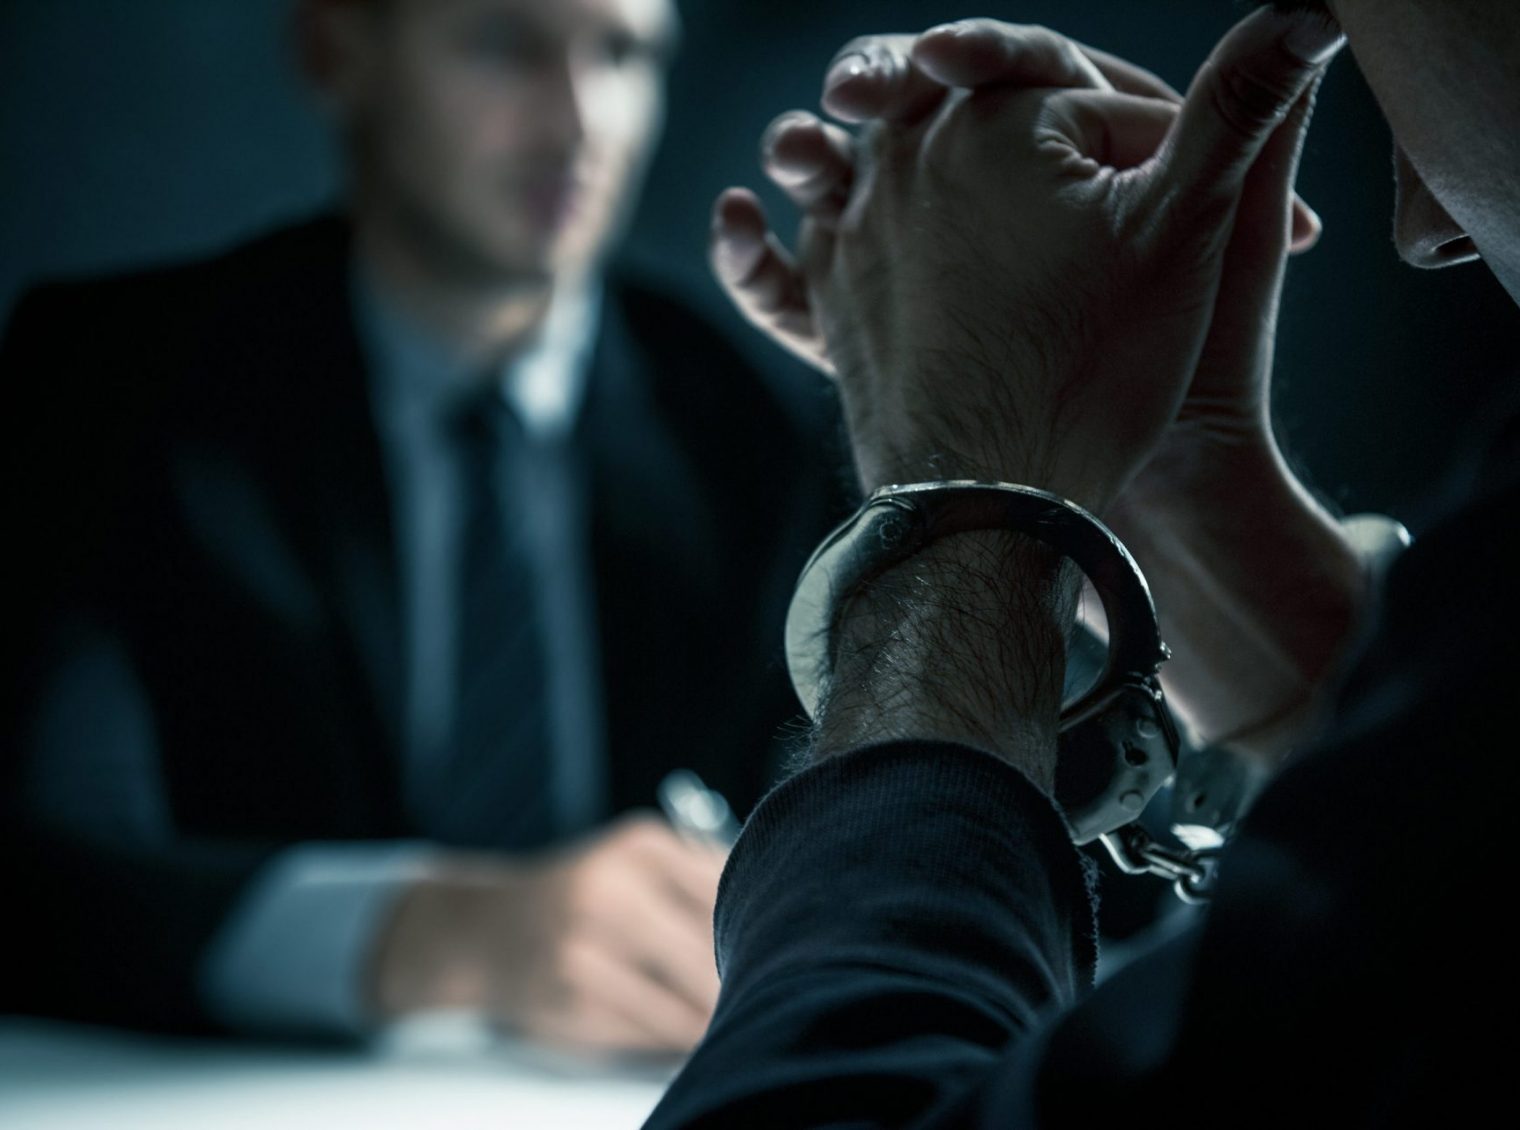 Criminal man with handcuffs in interrogation room feeling guilty after committed a crime